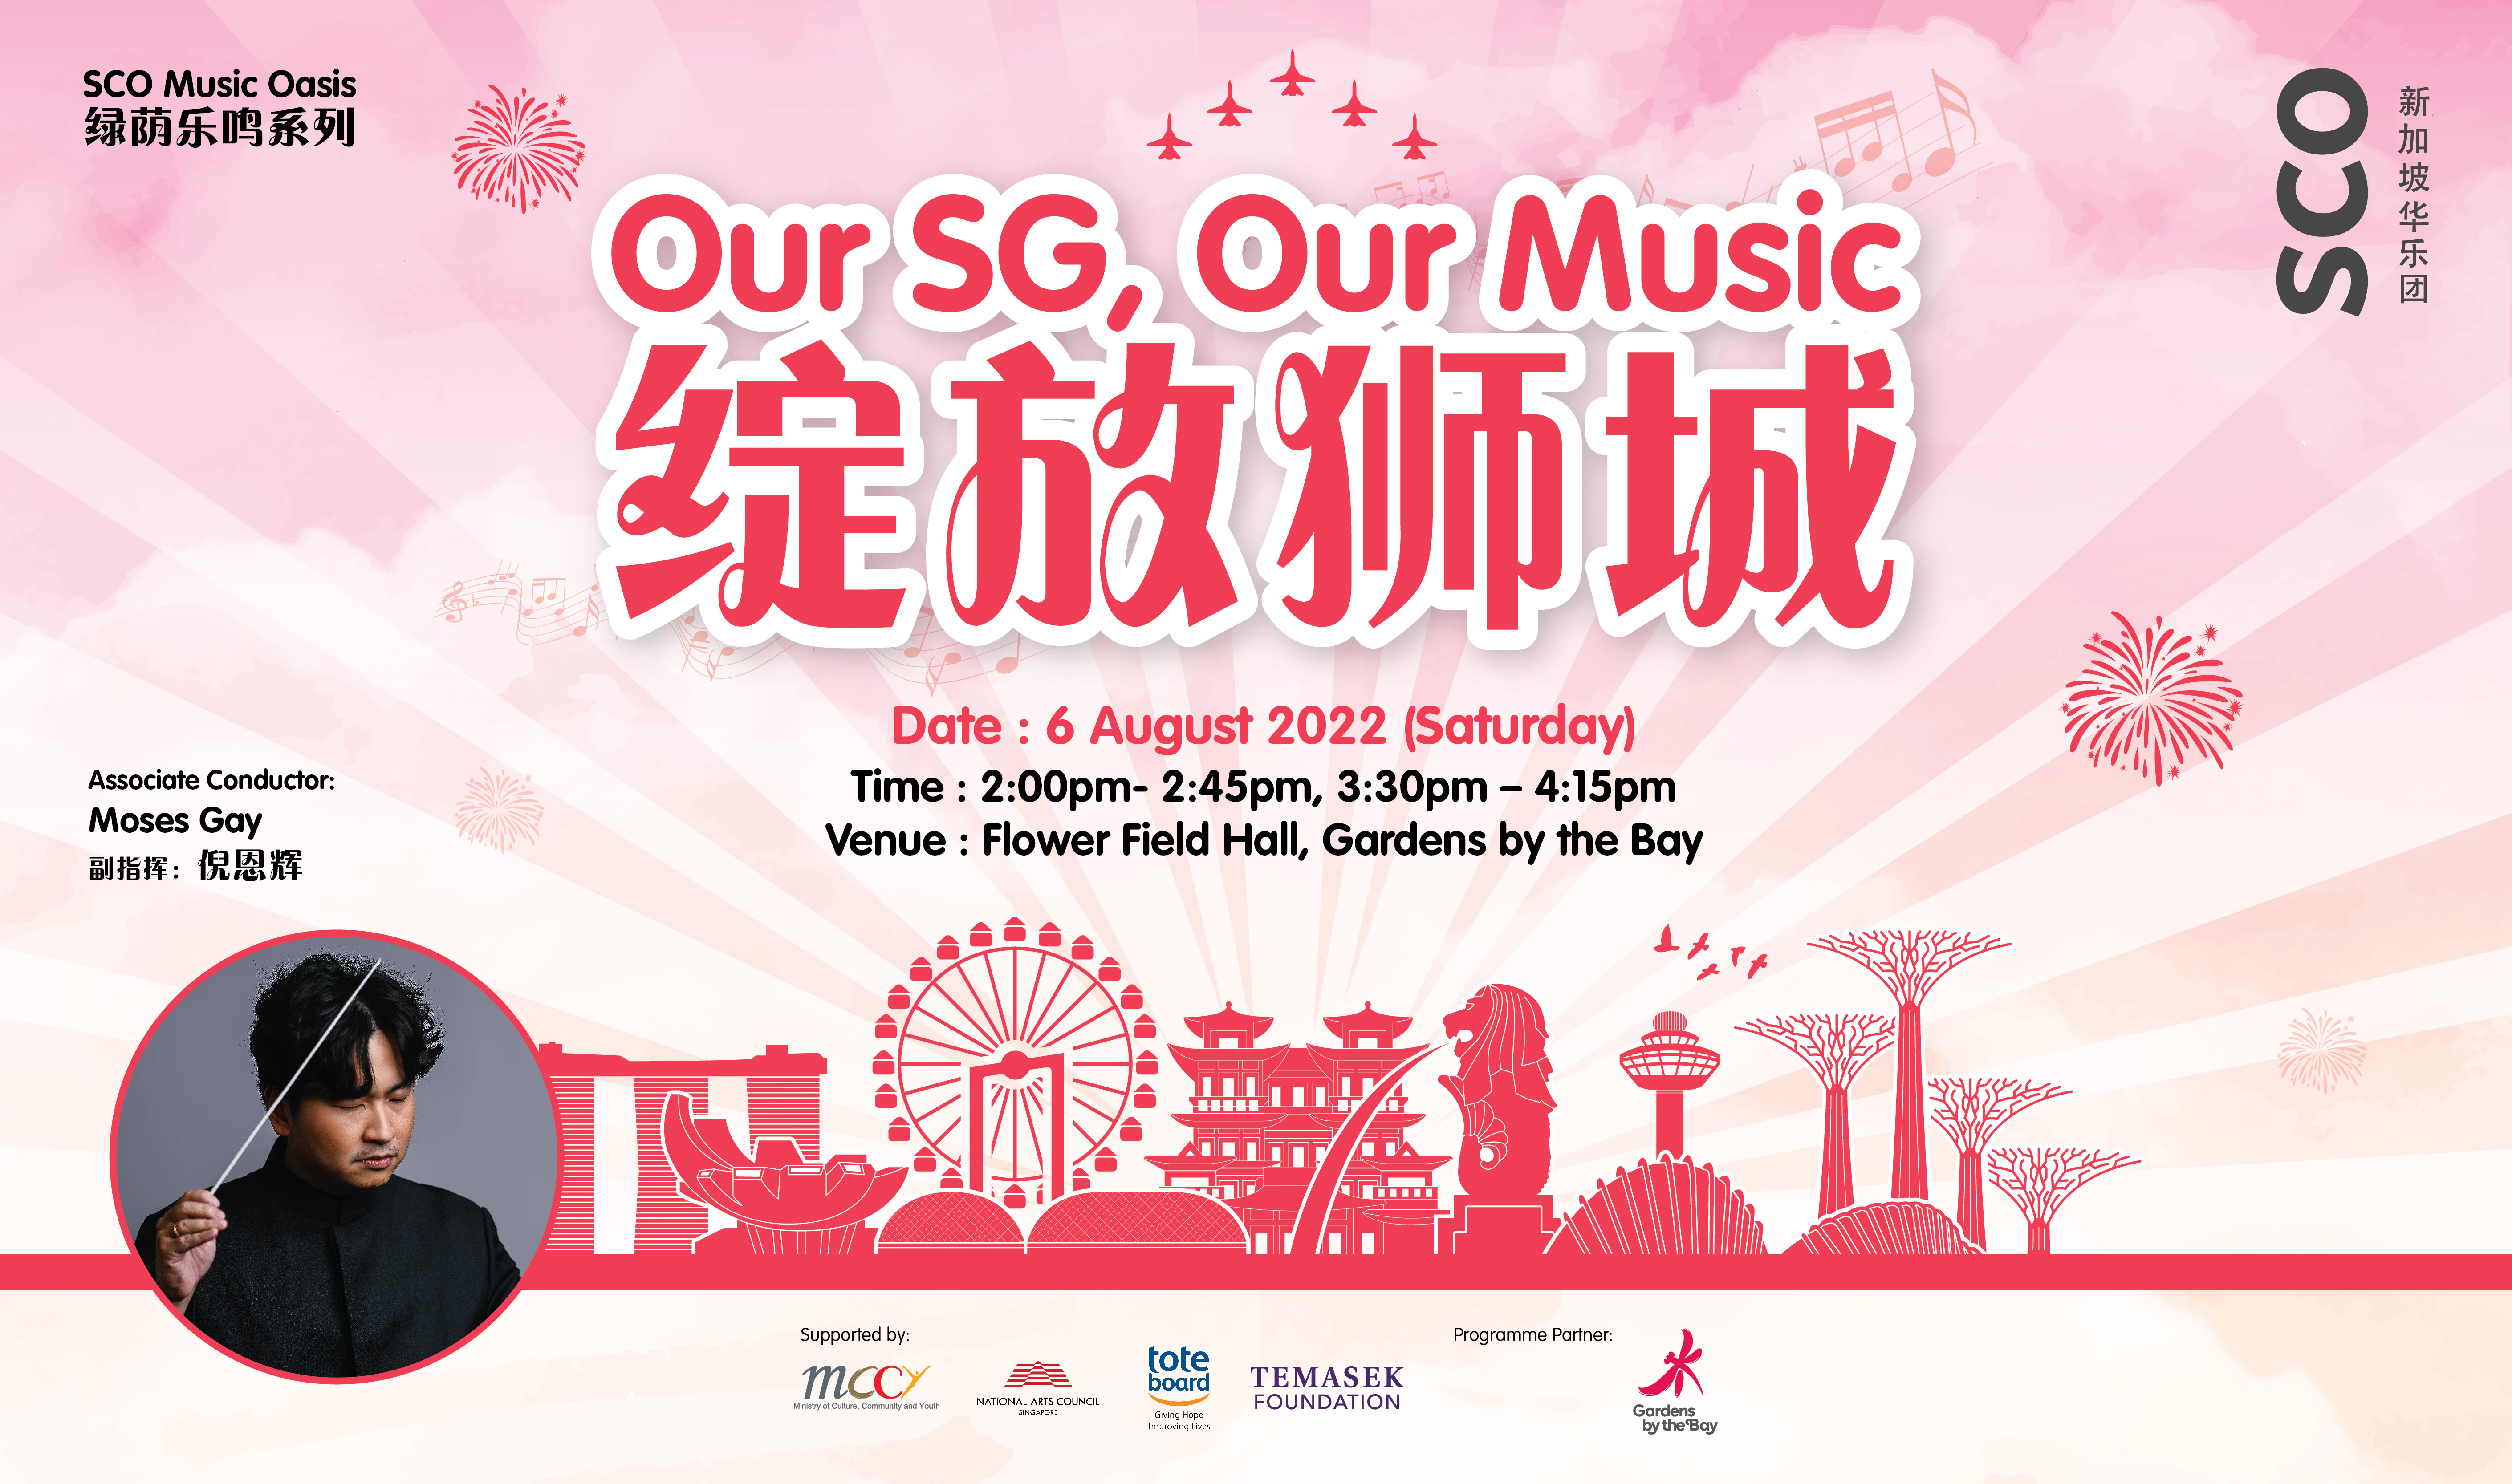 SCO Music Oasis: Our SG, Our Music